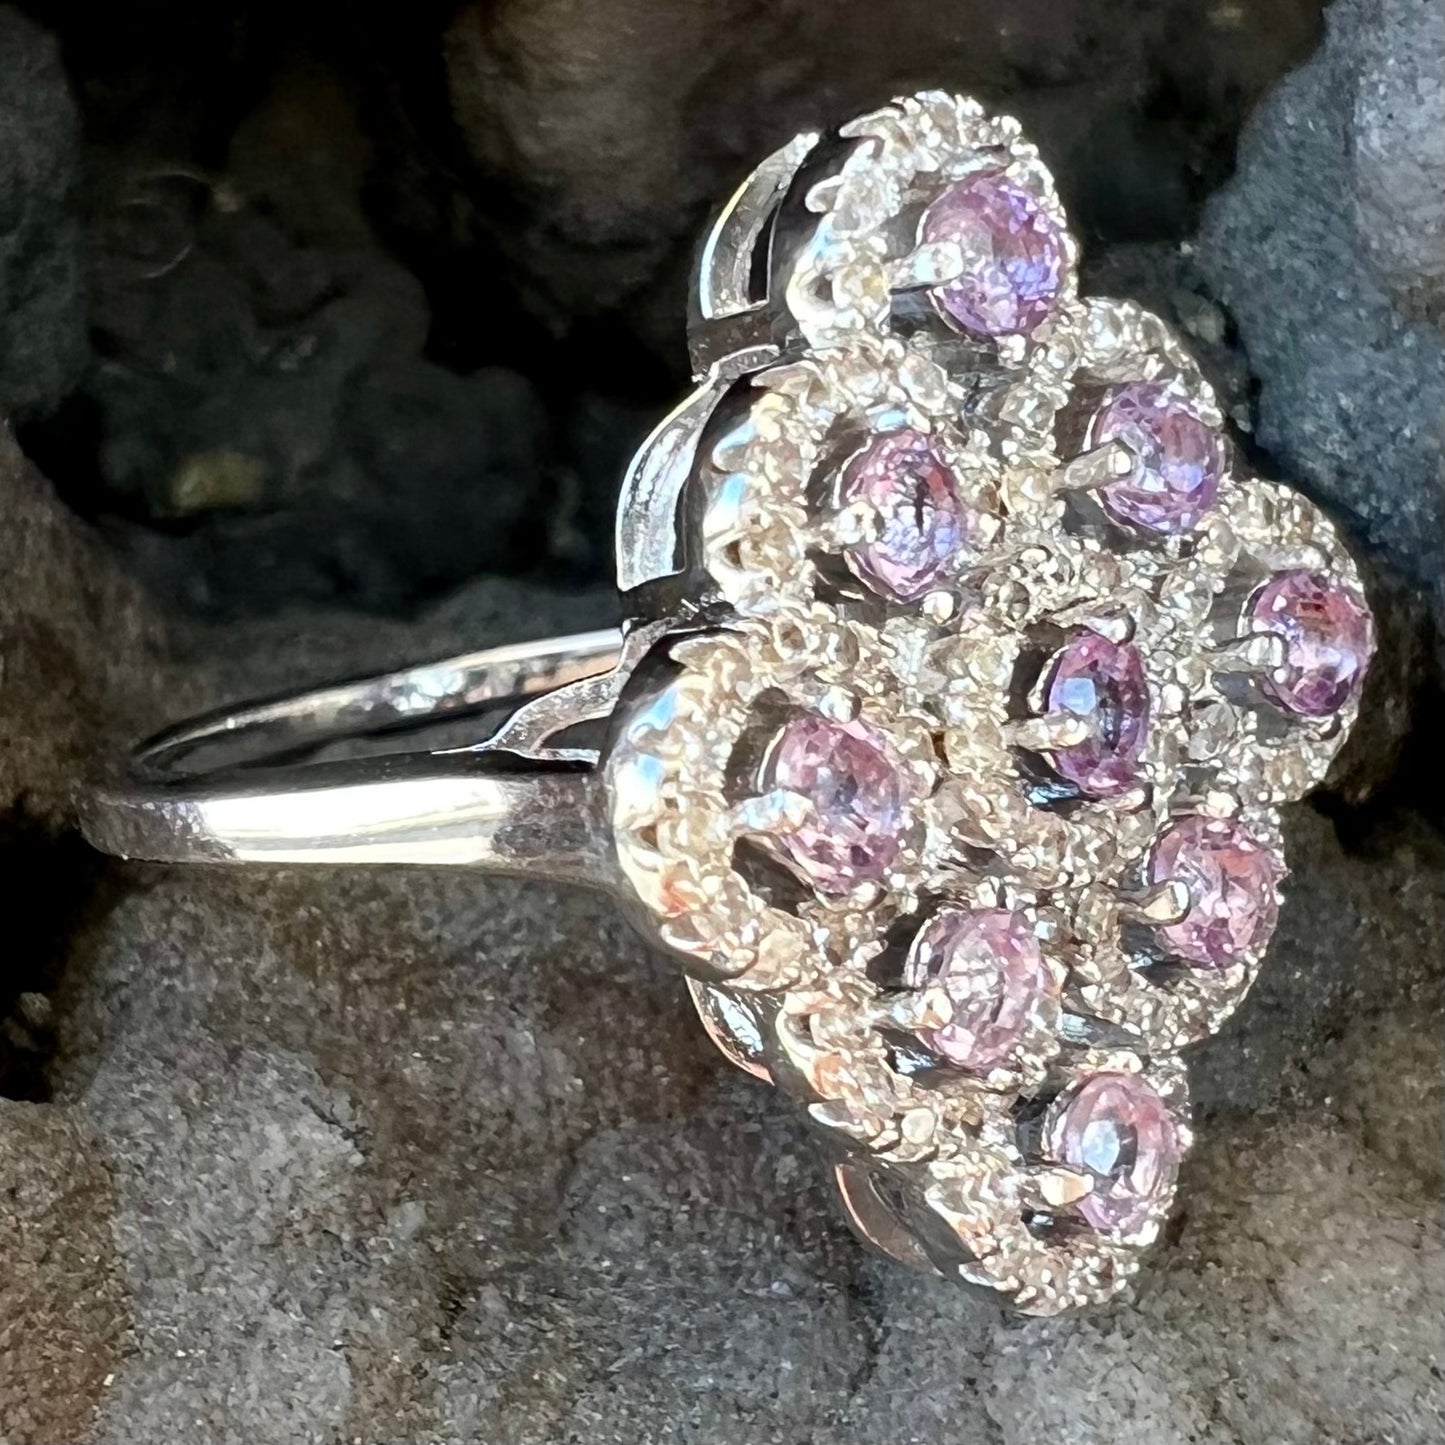 A silver ladies' ring set with 9 rose de France amethyst stones in white topaz halos.